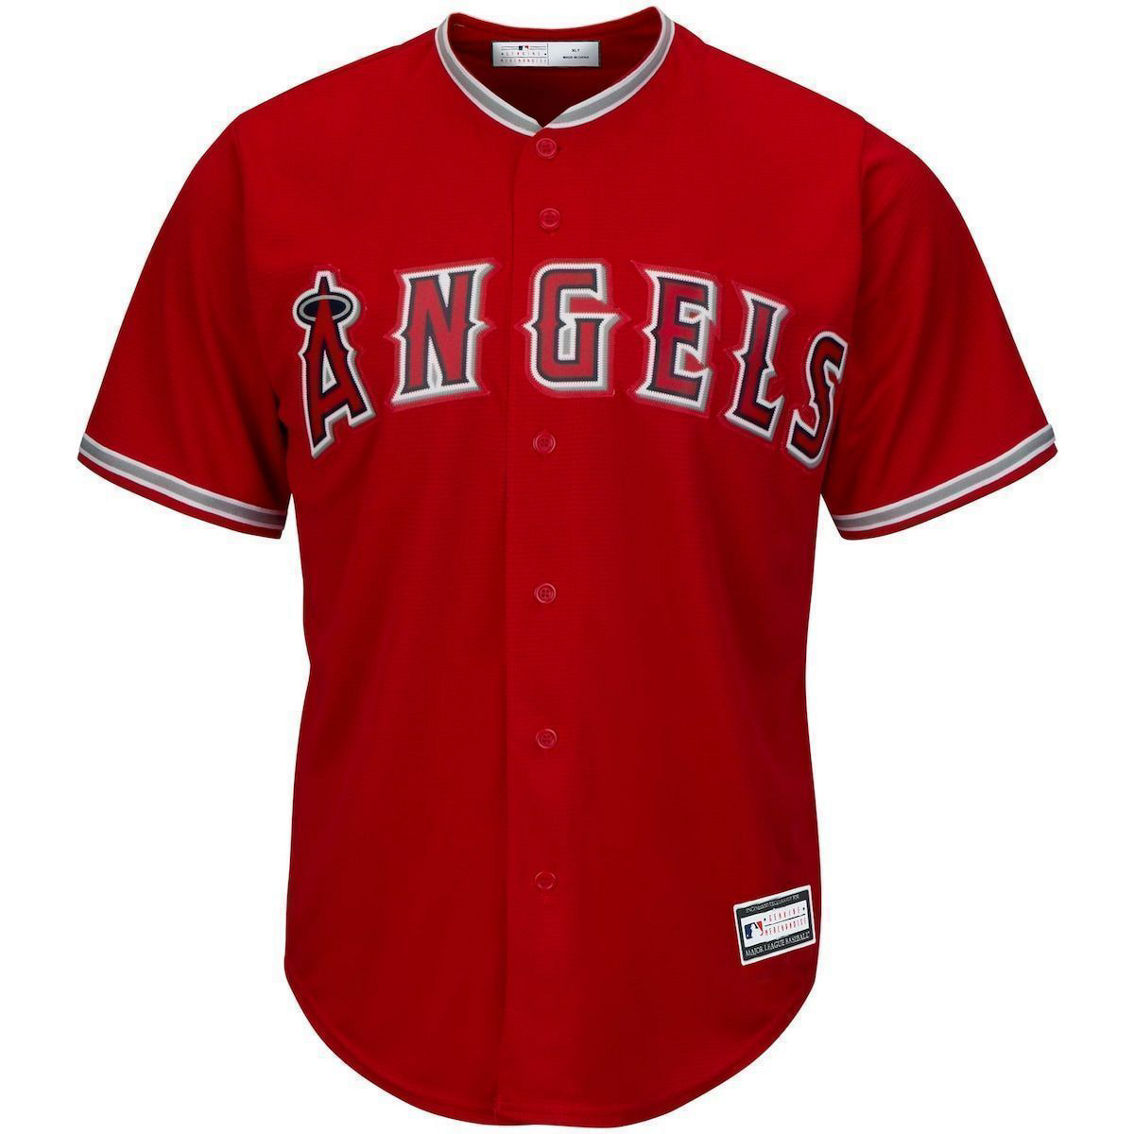 Profile Men's Mike Trout Red Los Angeles Angels Big & Tall Replica Player Jersey - Image 3 of 4